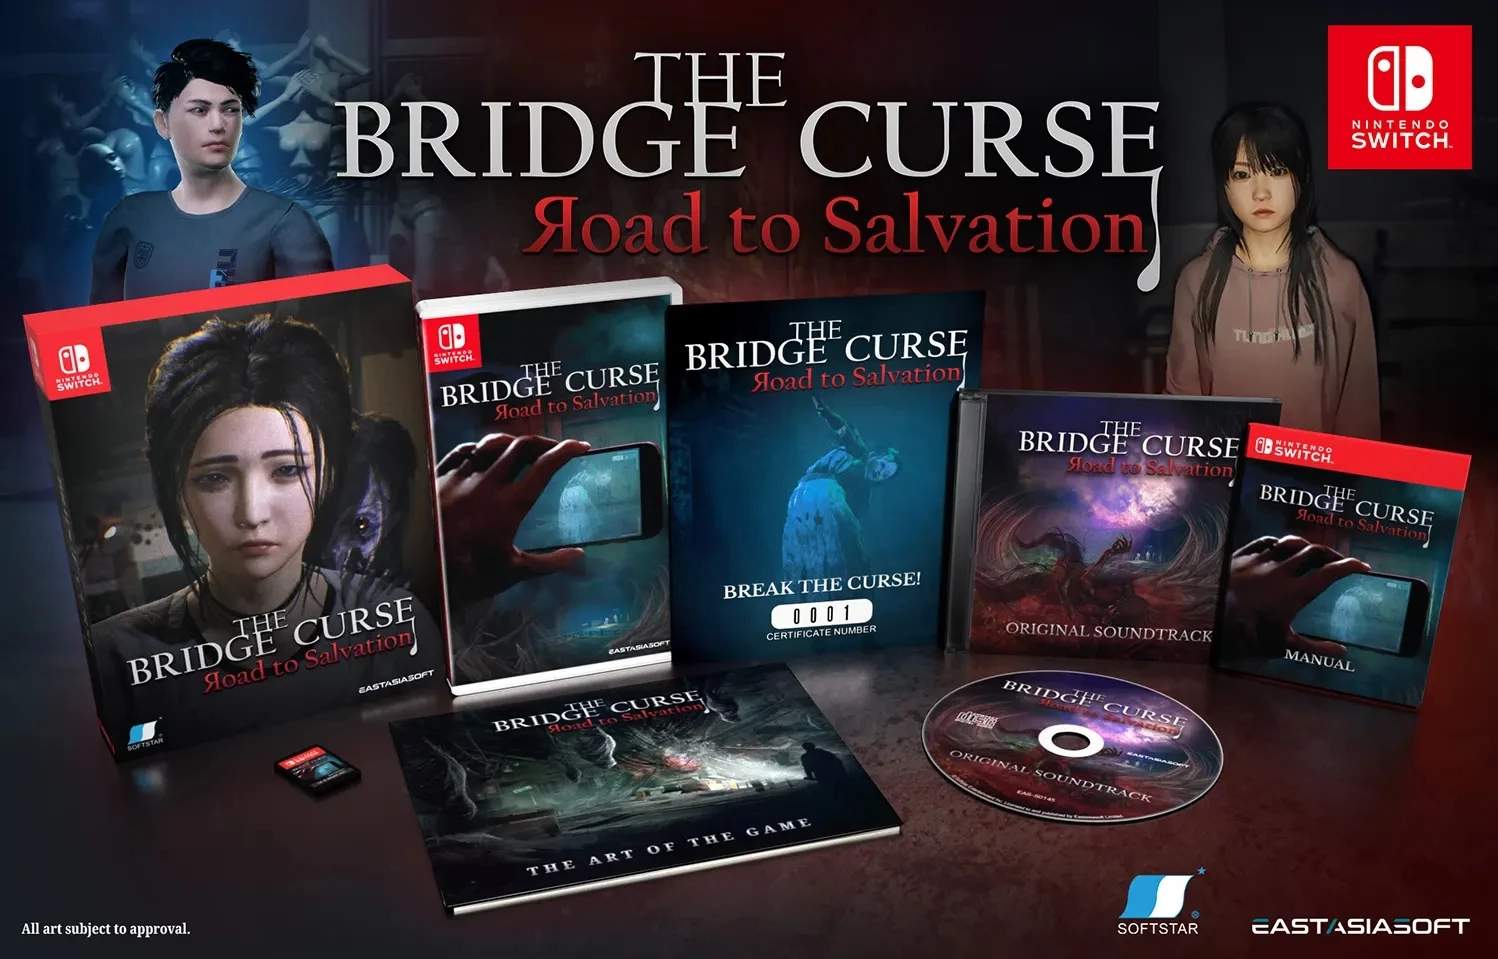 The Bridge Curse: Road to Salvation - Limited Edition (Asia Import) (Switch), EastAsiaSoft